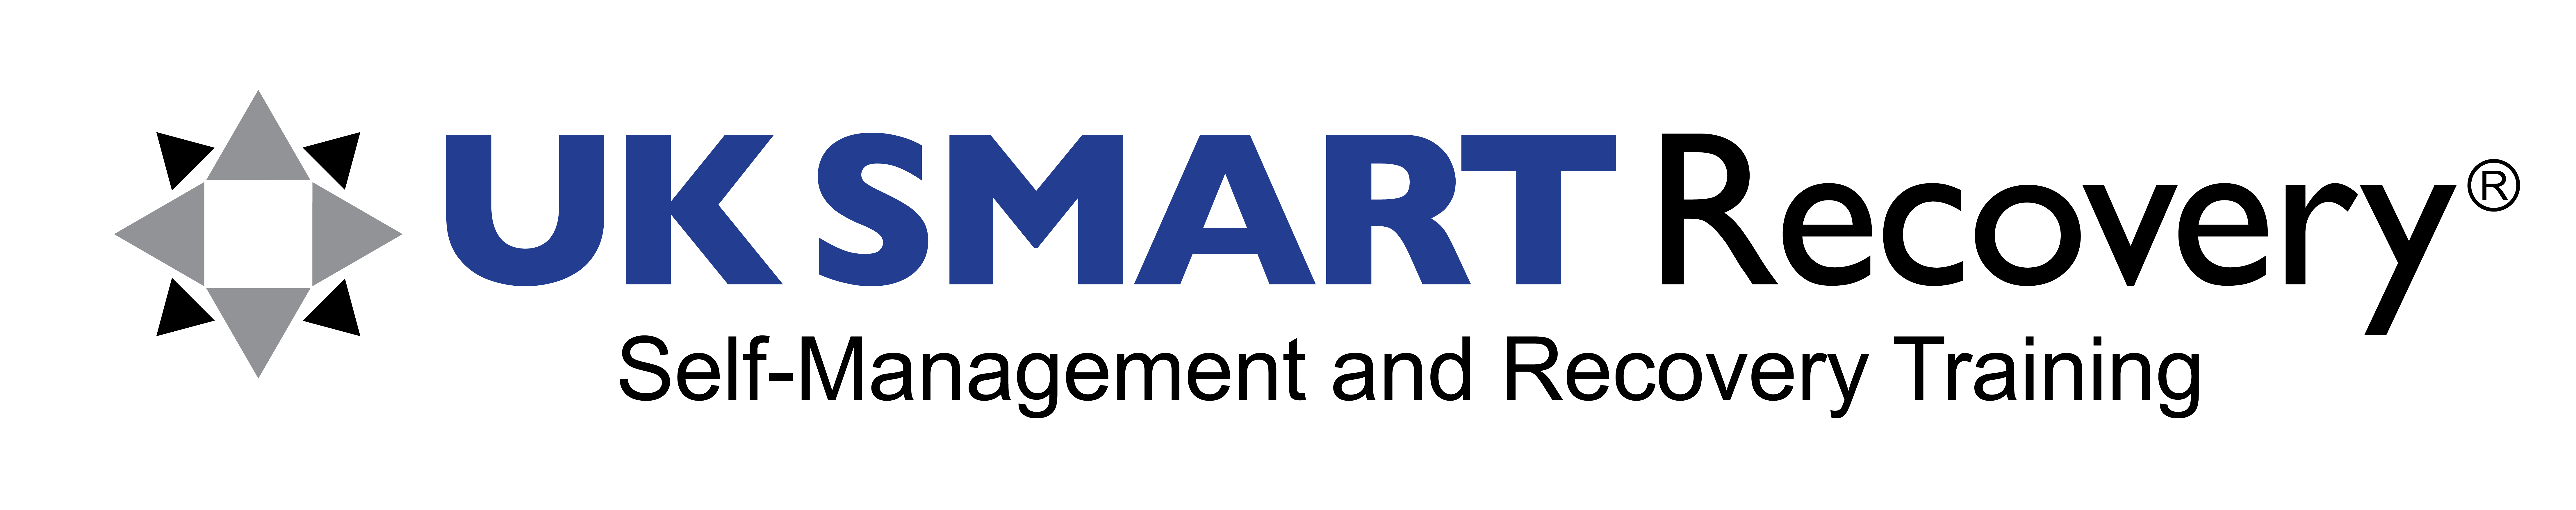 Smart Recovery Logo - UK SMART Recovery® Training Site